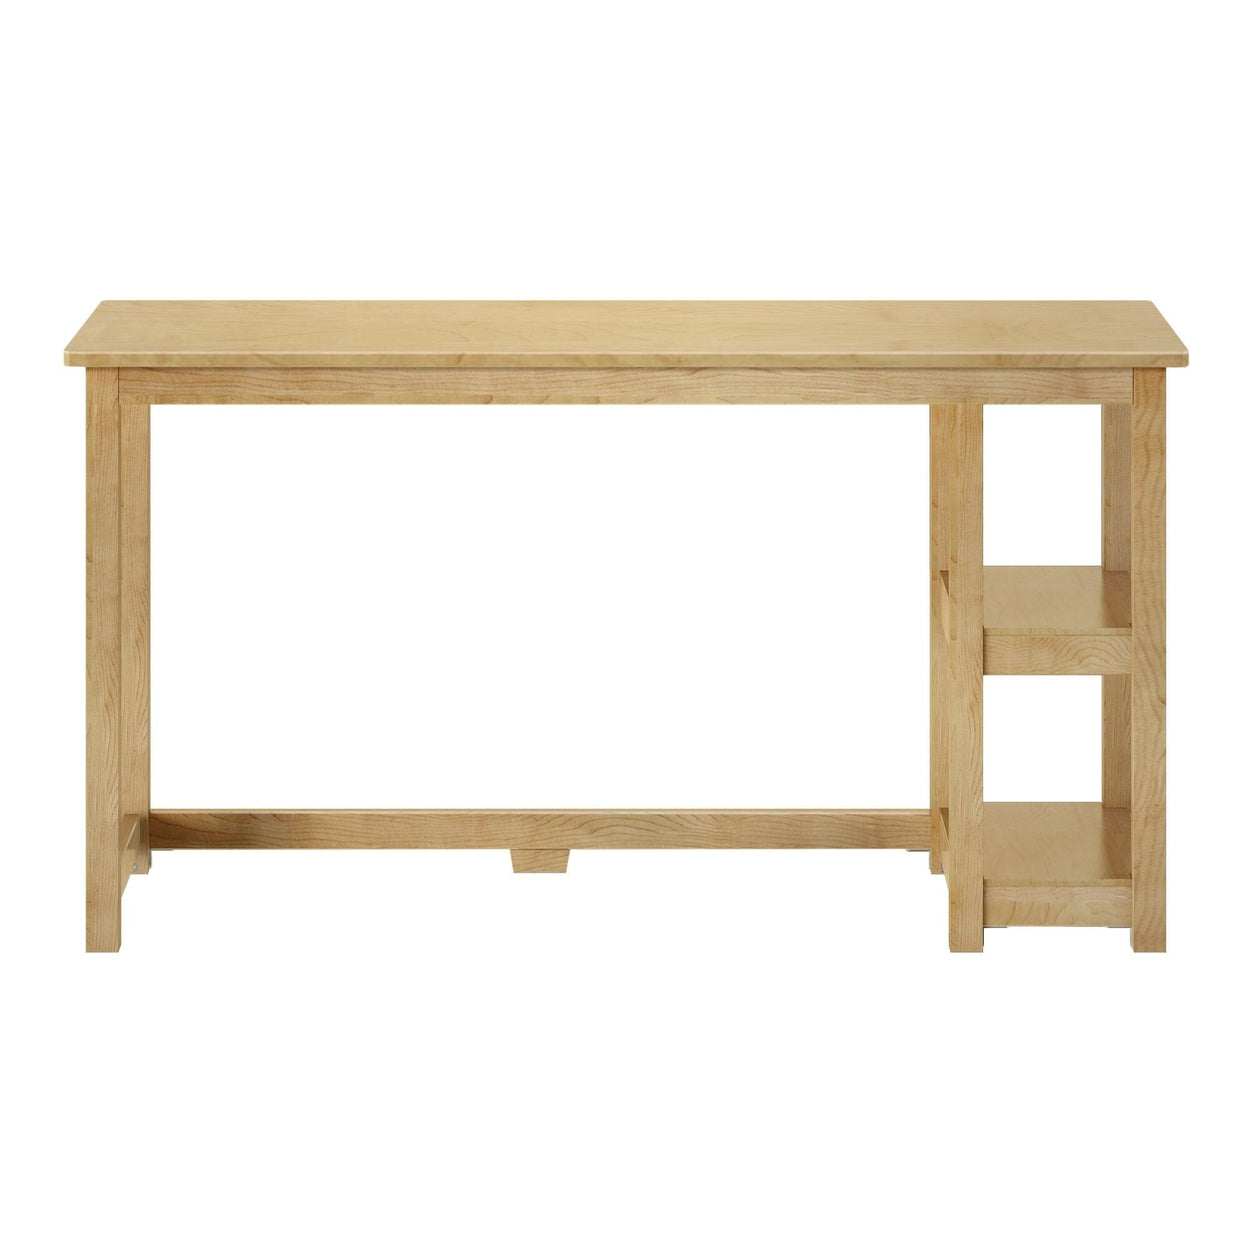 181405-001 : Furniture Desk with Bookshelves - 55 inches, Natural